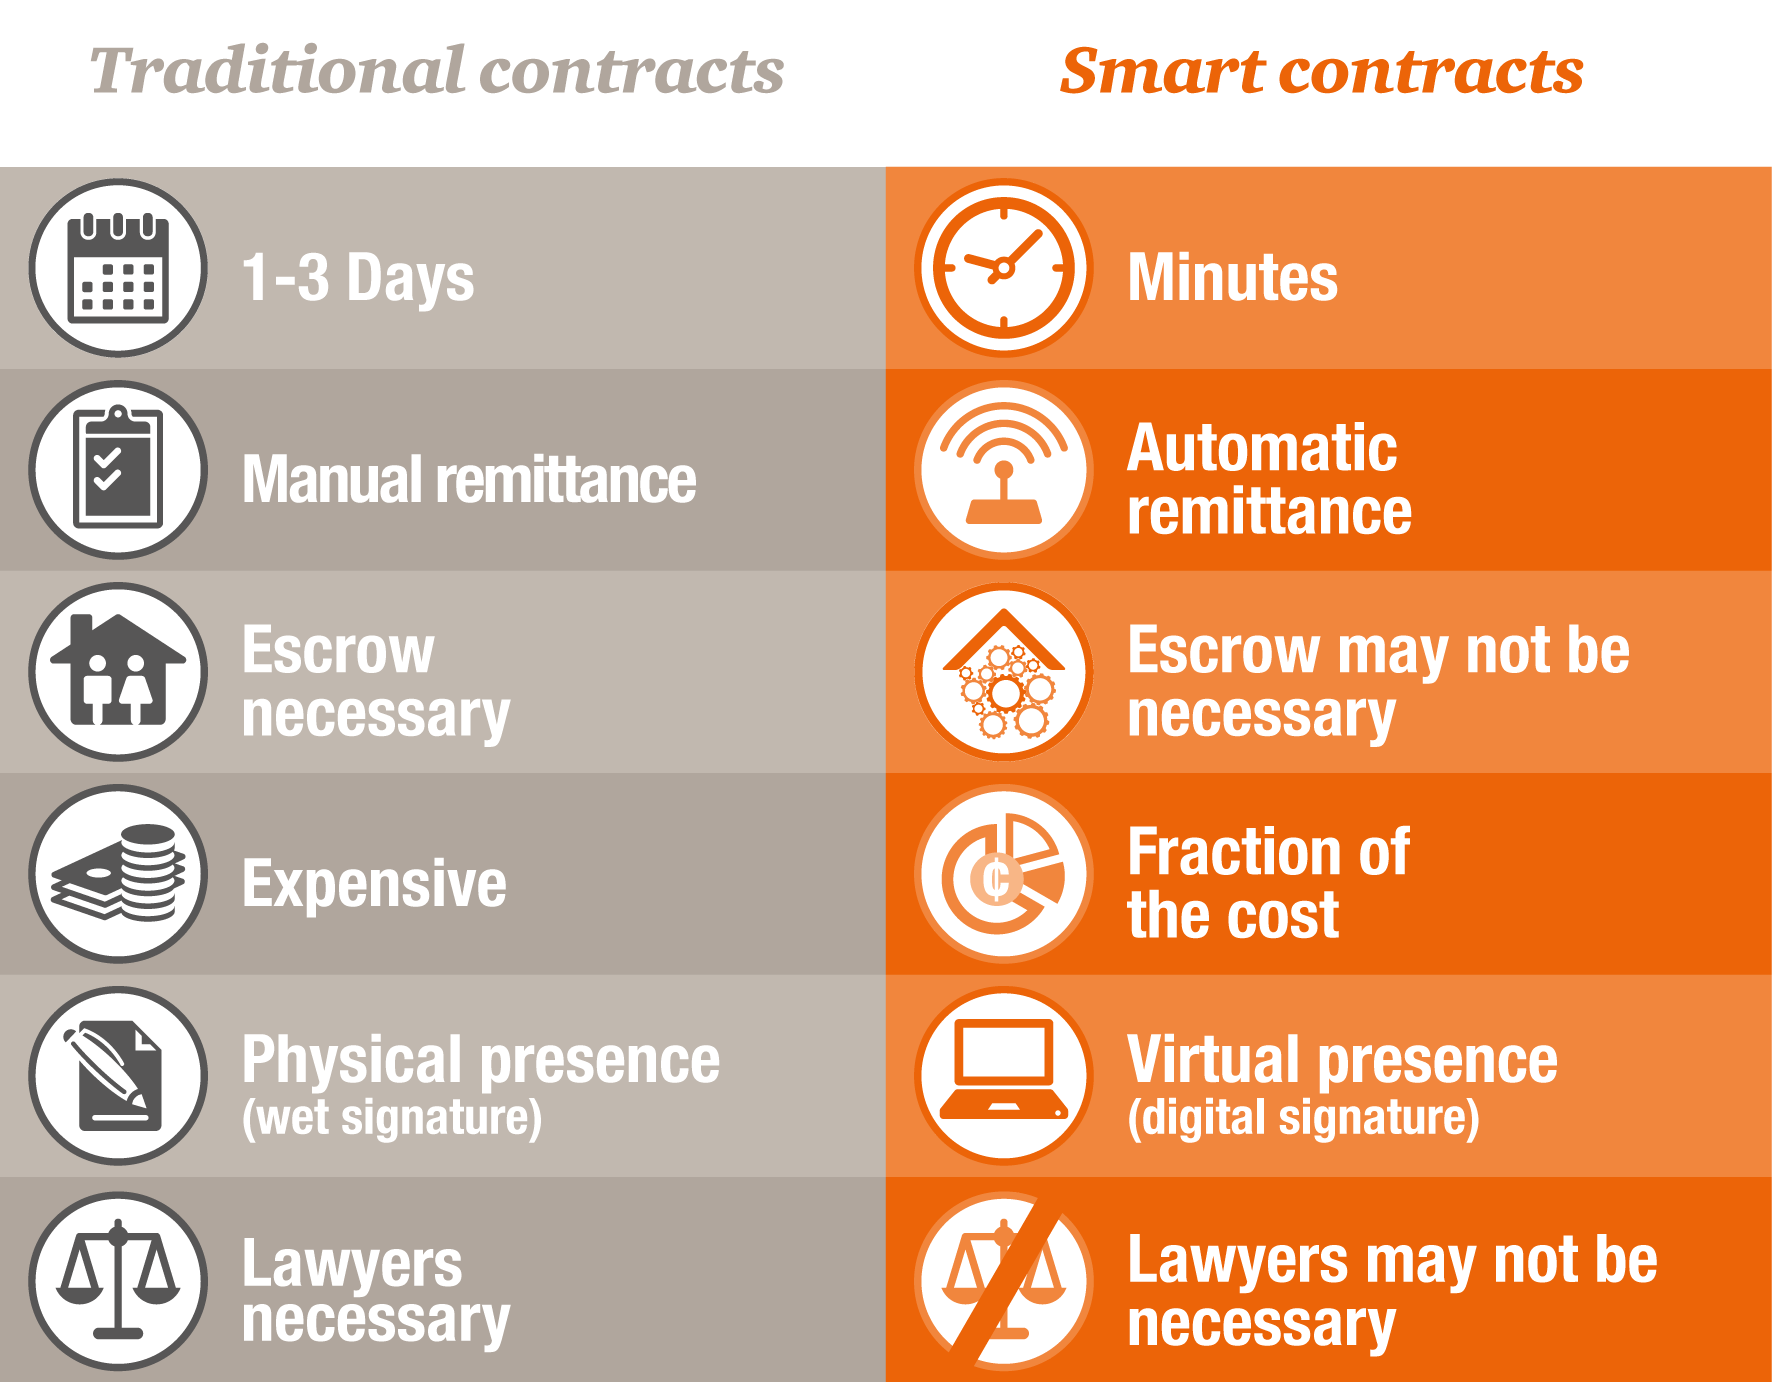 sca-process-performance-tradition-contracts-table-e1488915150767.png